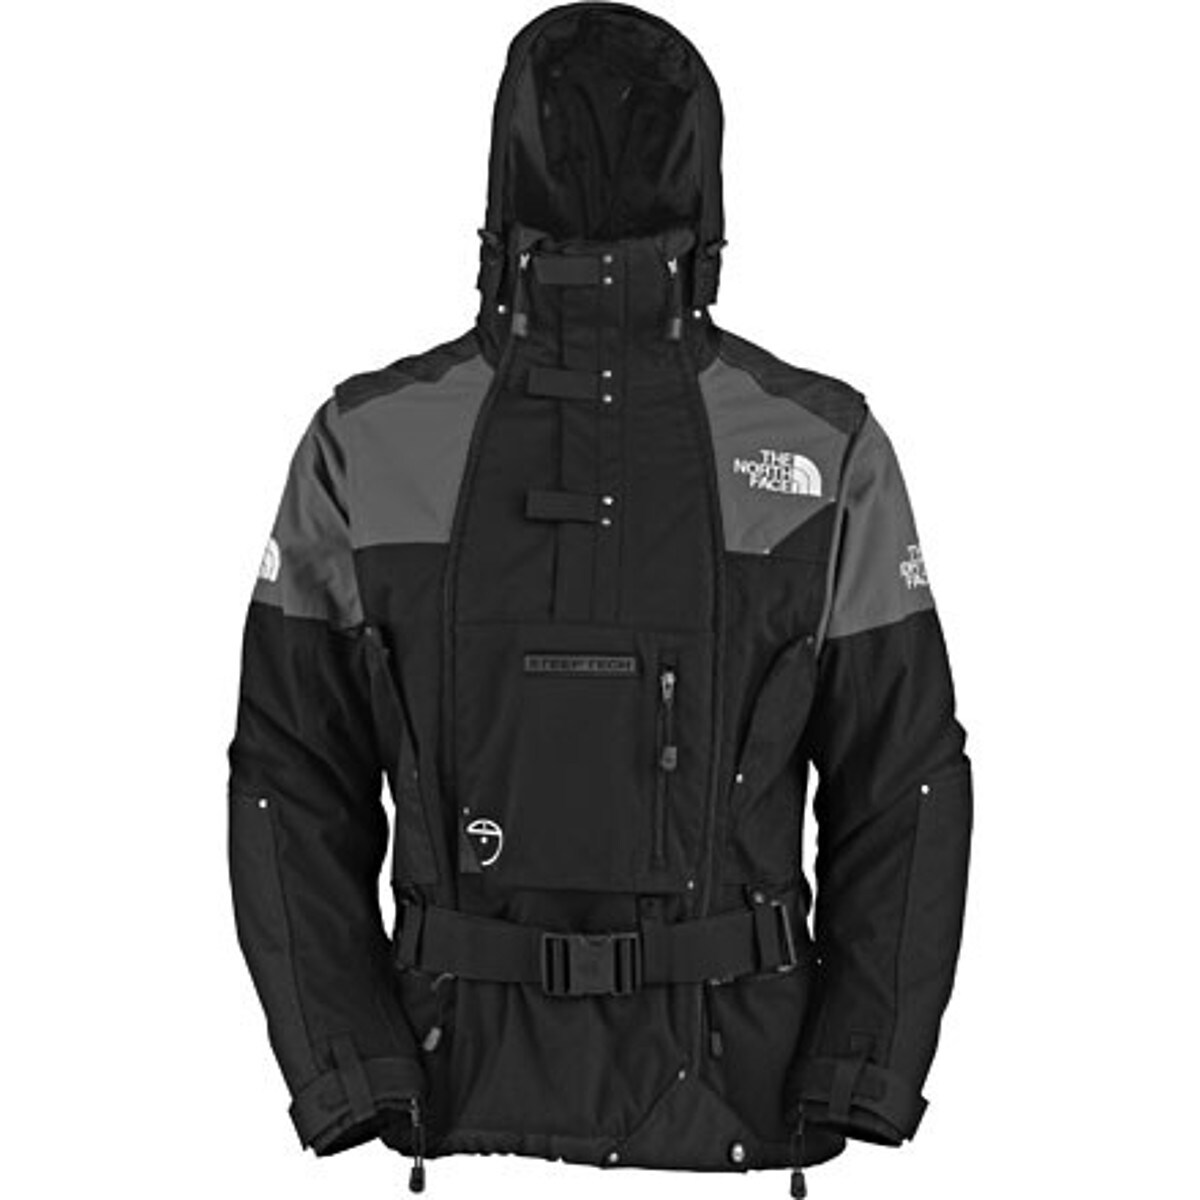 The North Face Agency Jacket - Men's - Clothing